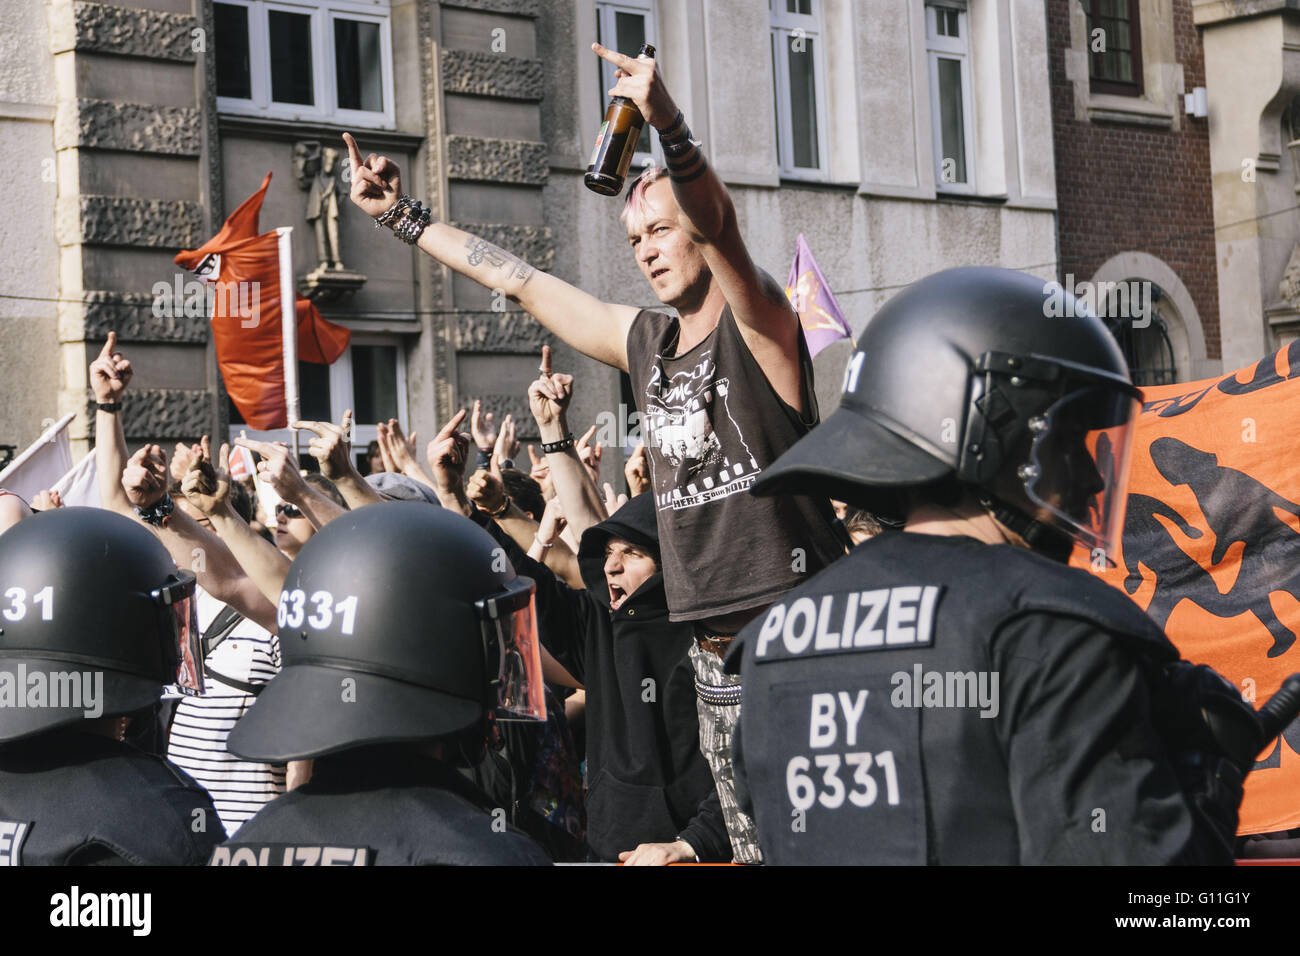 Berlin, Berlin, Germany. 7th May, 2016. Activists during the counter protests against the rally held under the motto 'Merkel muss weg![Merkel must go]' organised by far-right group 'We for Berlin & We for Germany' Credit:  Jan Scheunert/ZUMA Wire/Alamy Live News Stock Photo